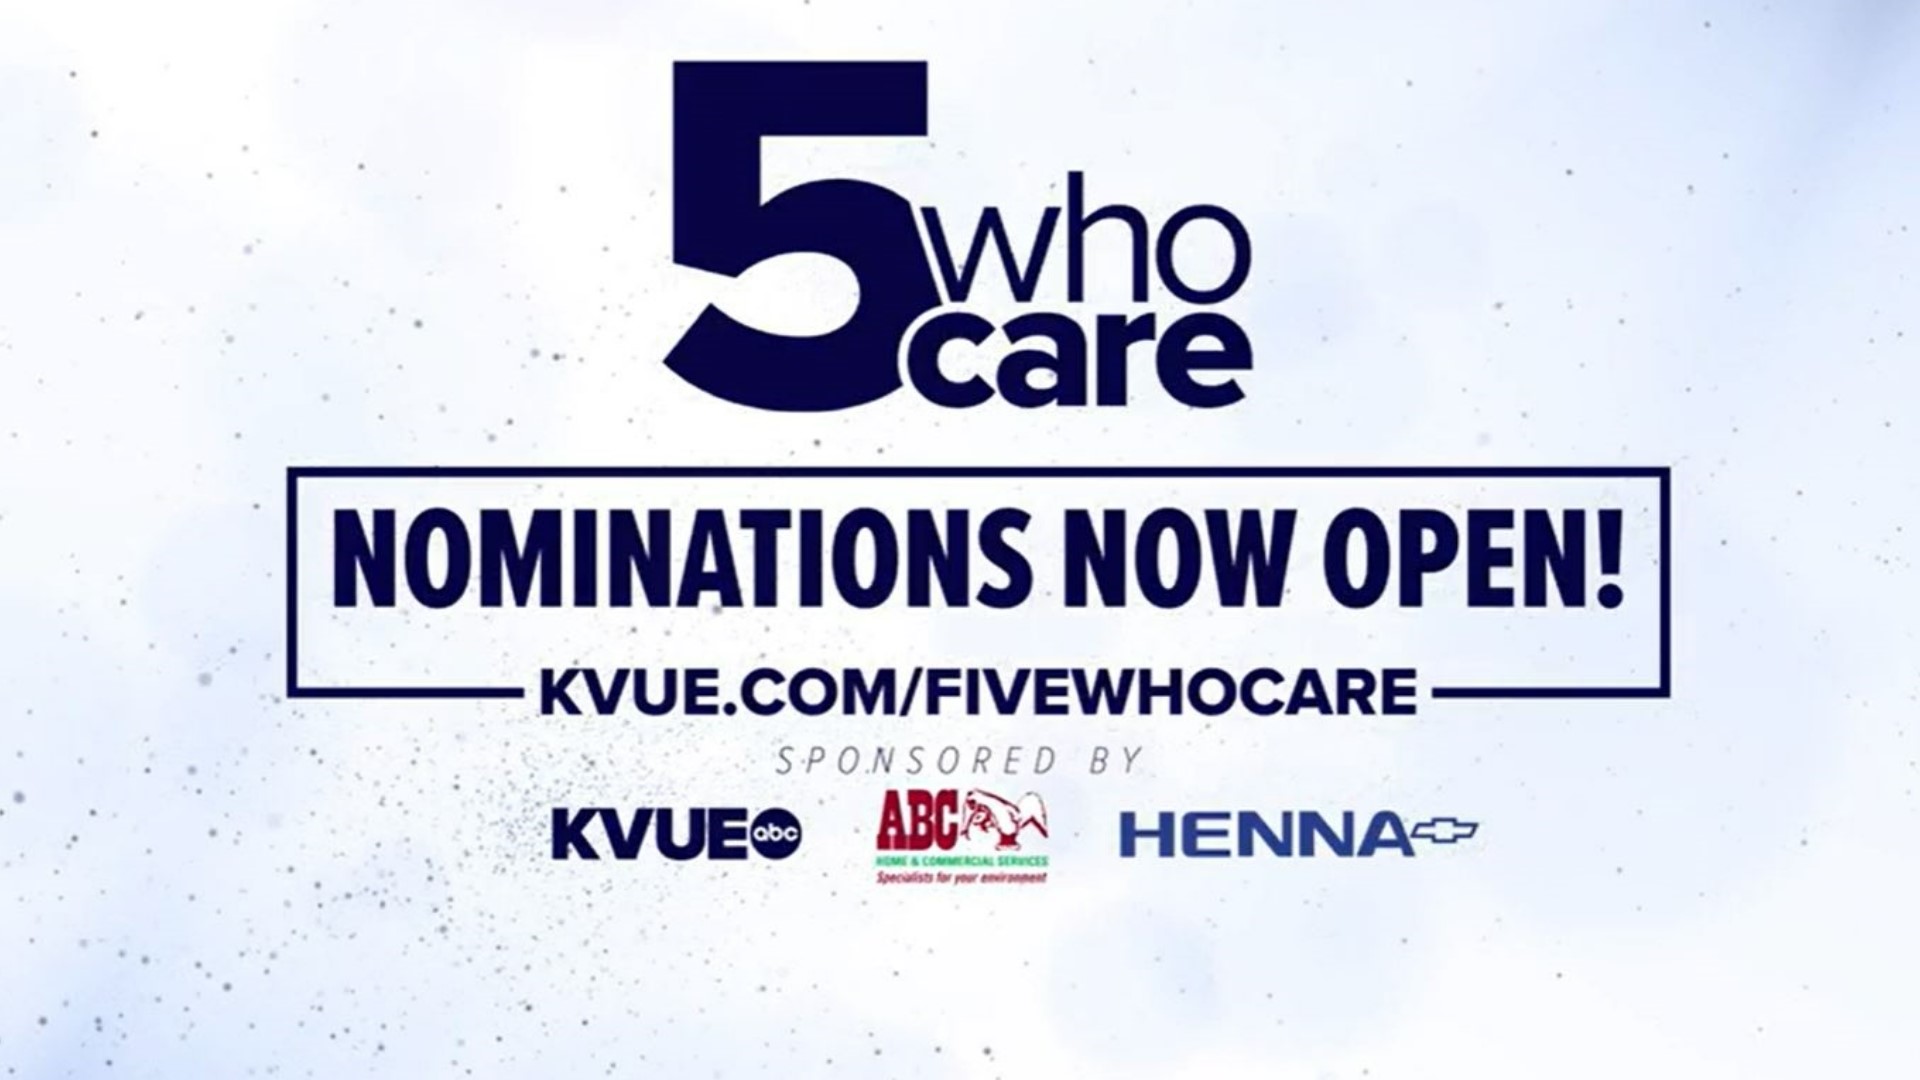 Nominations are now open for the KVUE 5 Who Care awards.